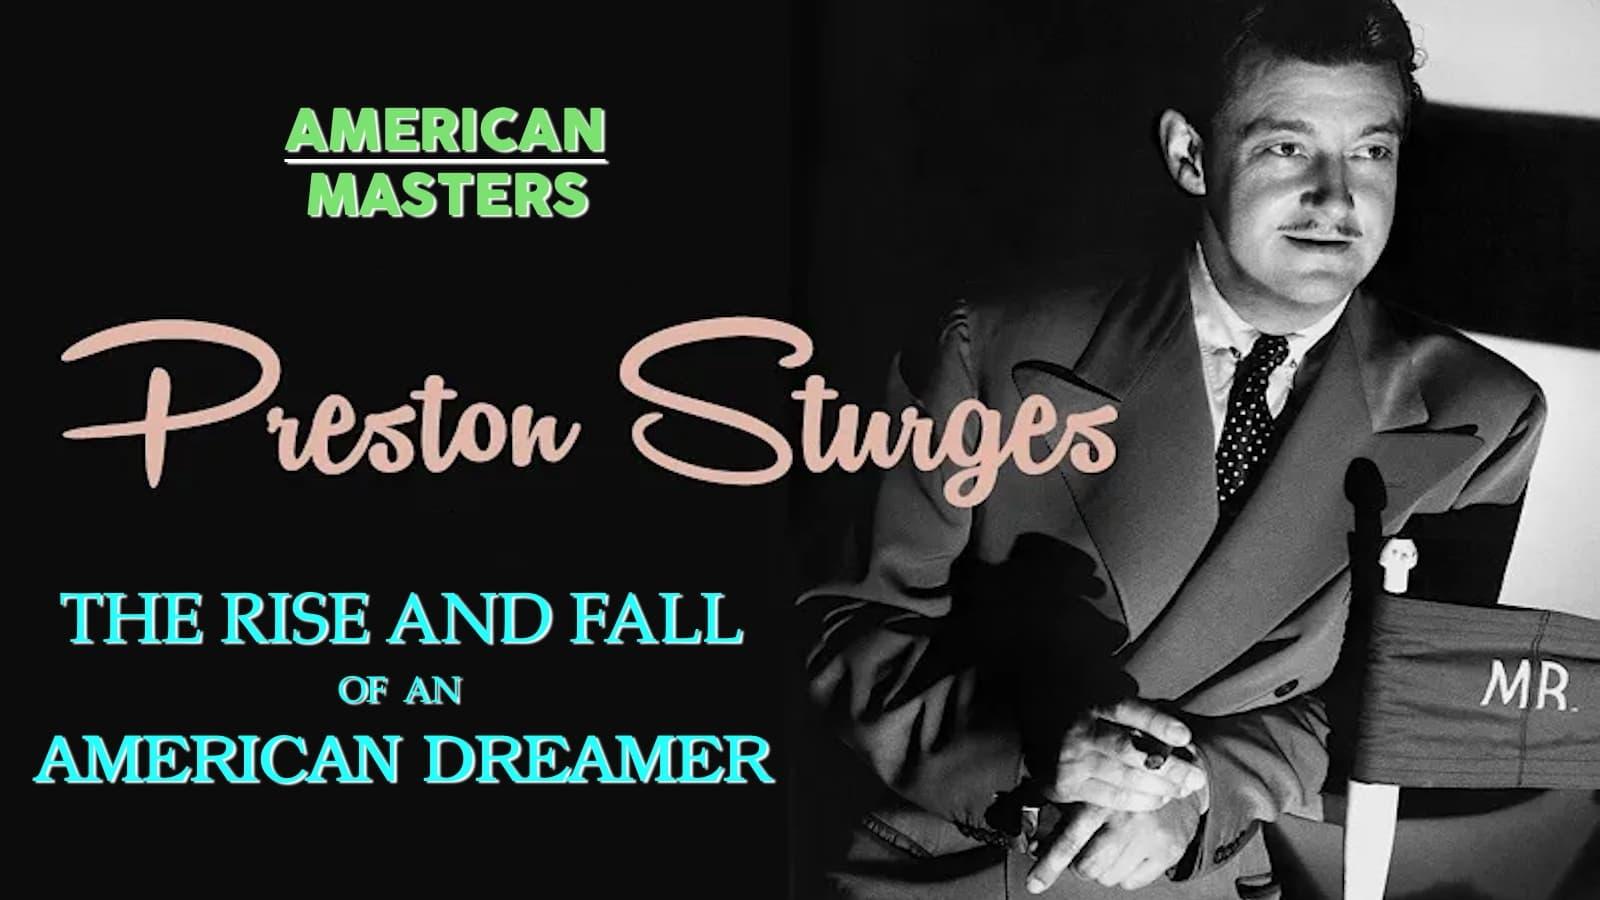 Preston Sturges: The Rise and Fall of an American Dreamer backdrop